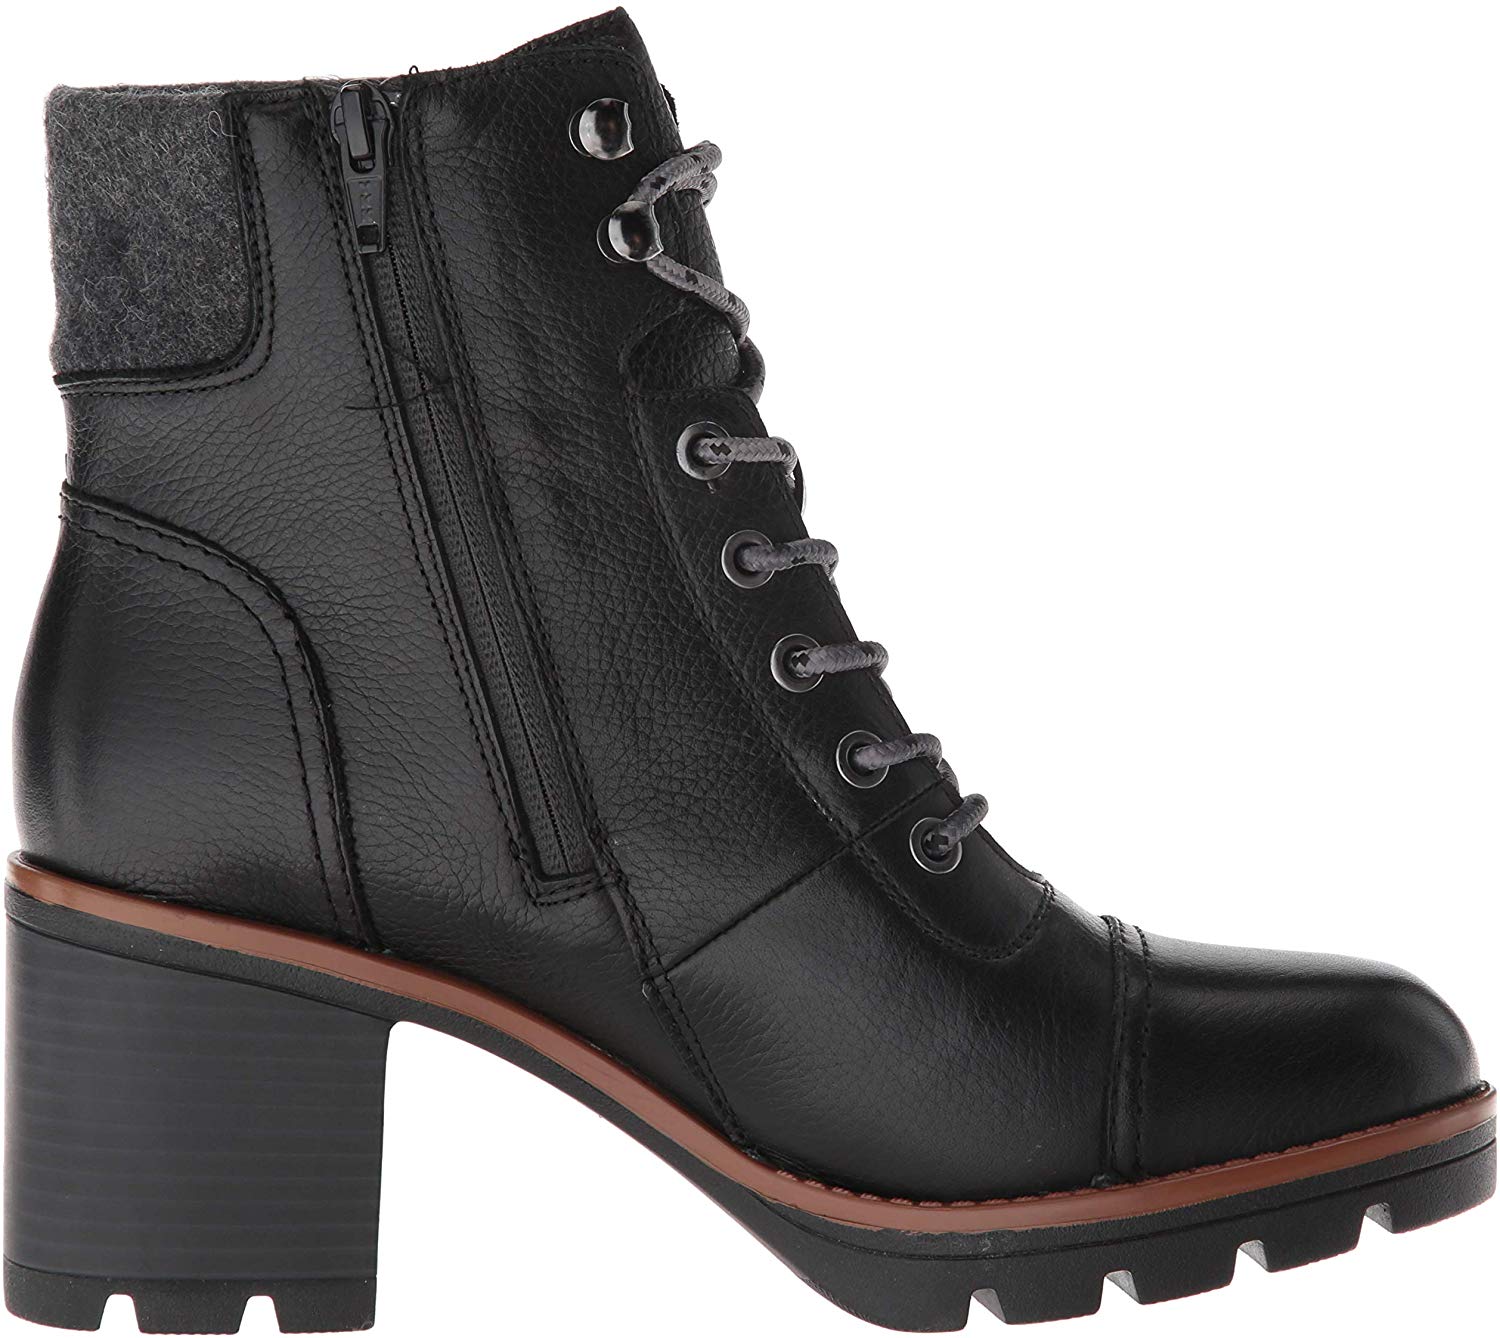 Naturalizer Women's Varuna Booties Ankle Boot, Black Leather, Size 11.0 ...